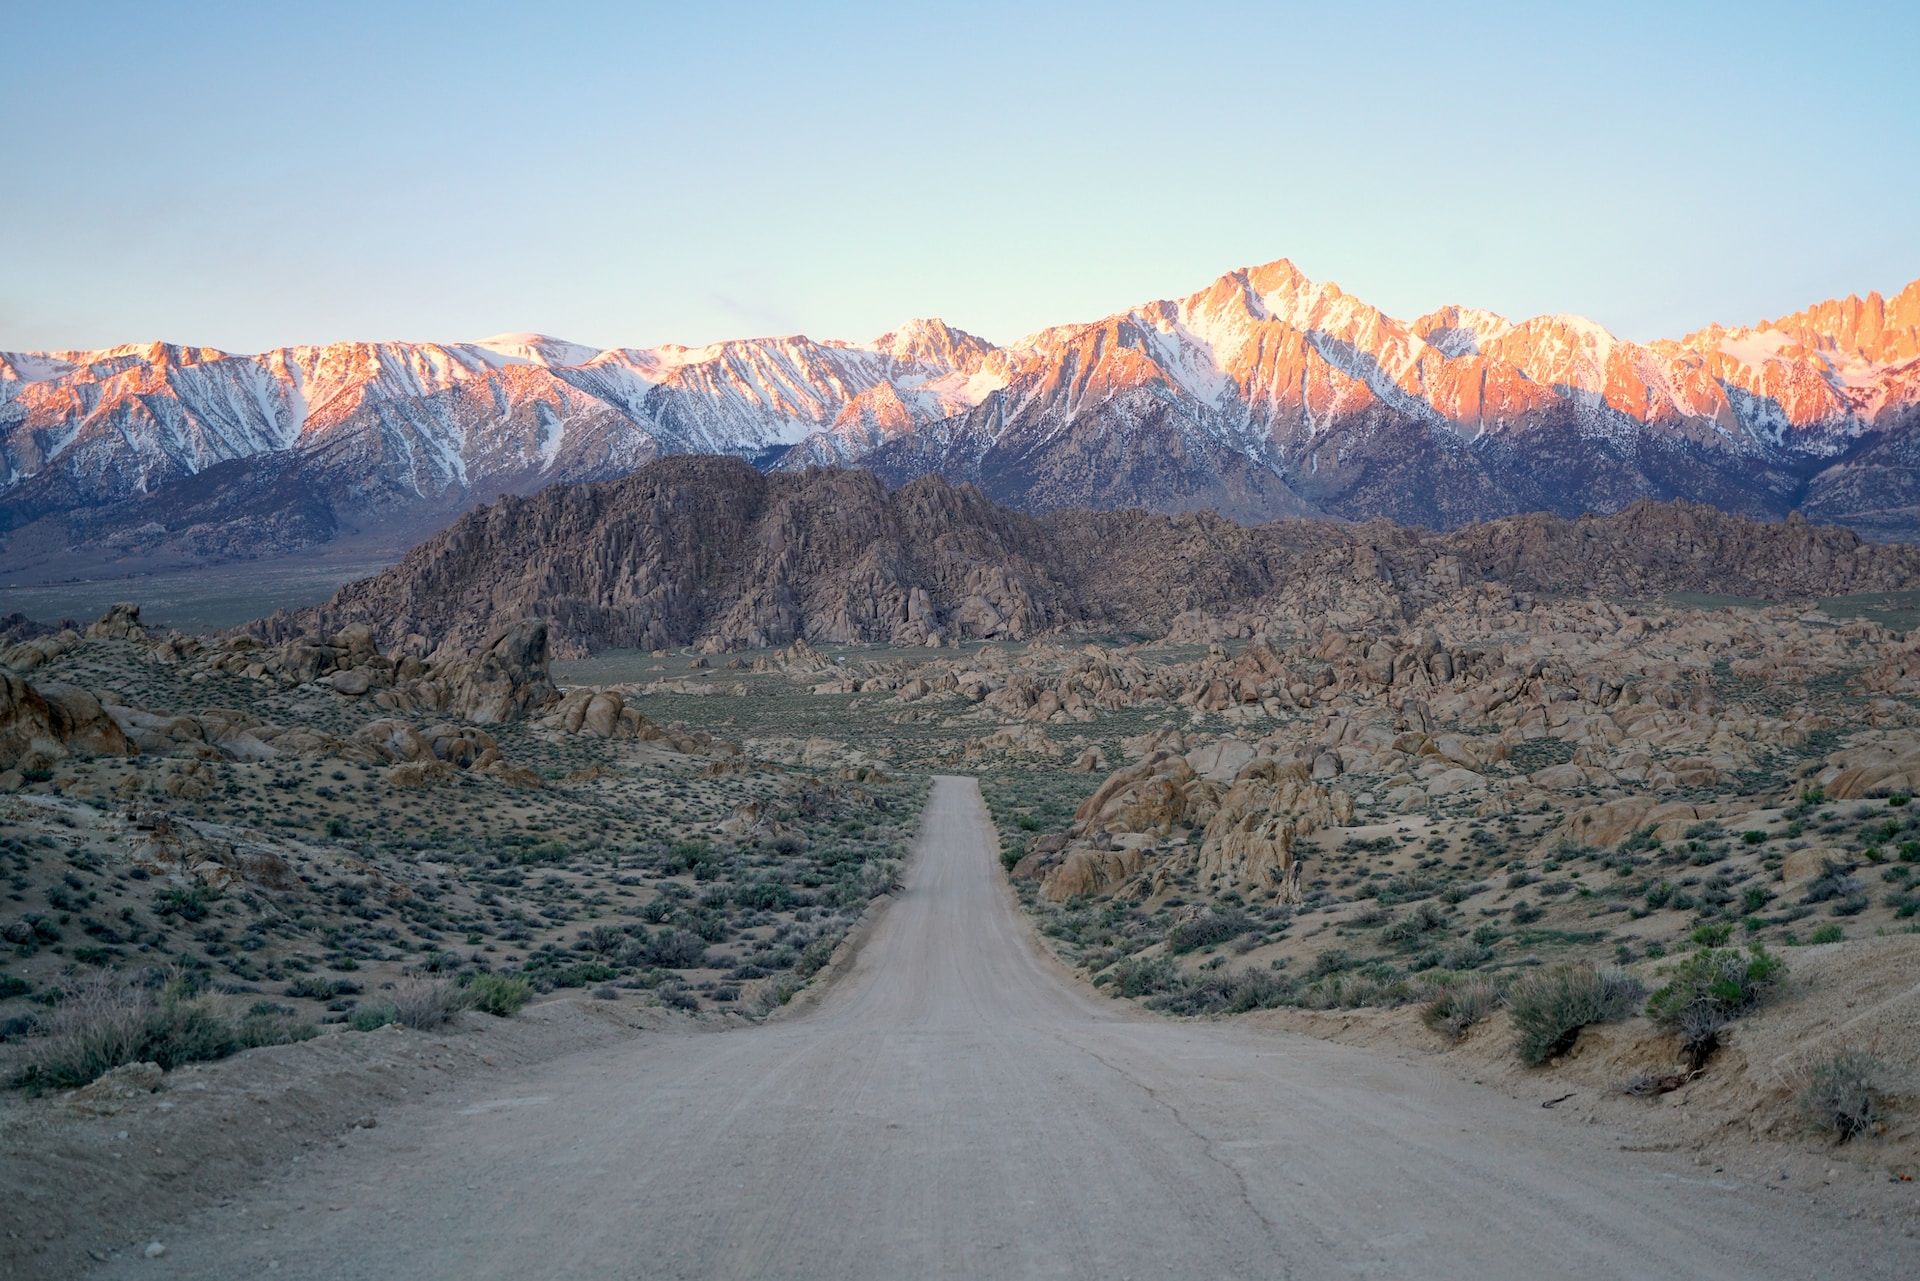 A view of the Alabama Hills in Lone Pine, California